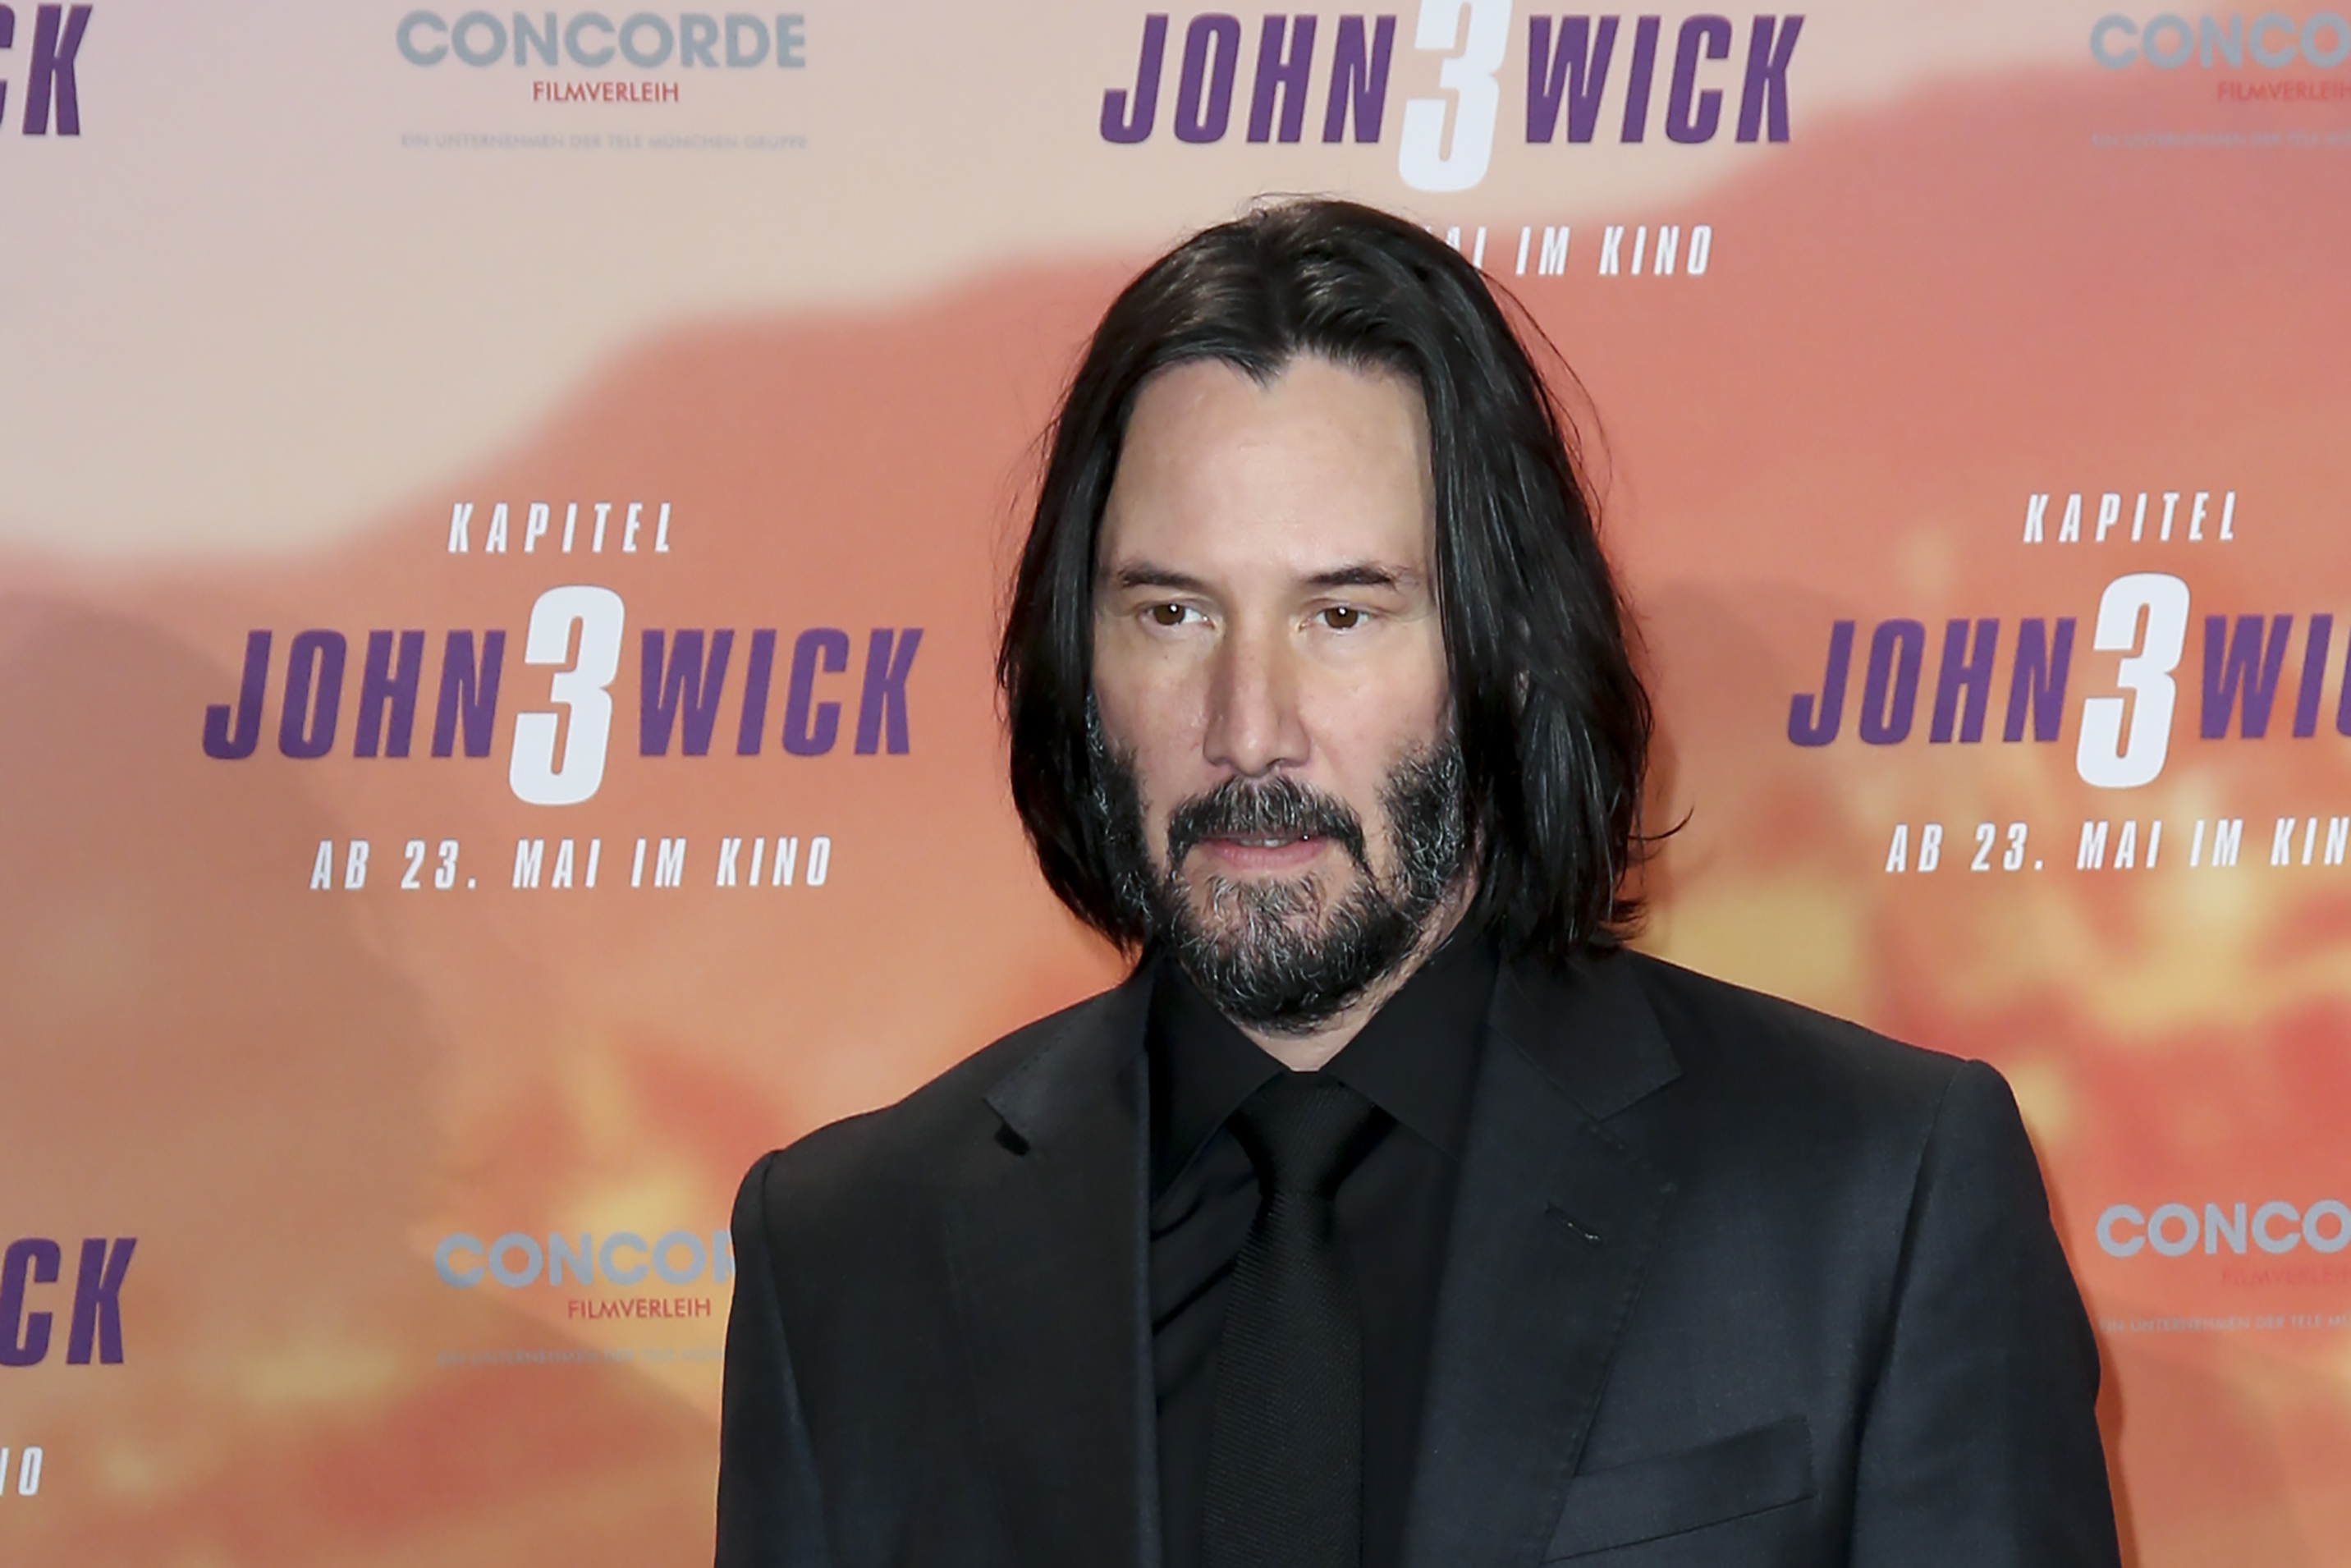 Keanu Reeves attends the photocall in Berlin for John Wick 3